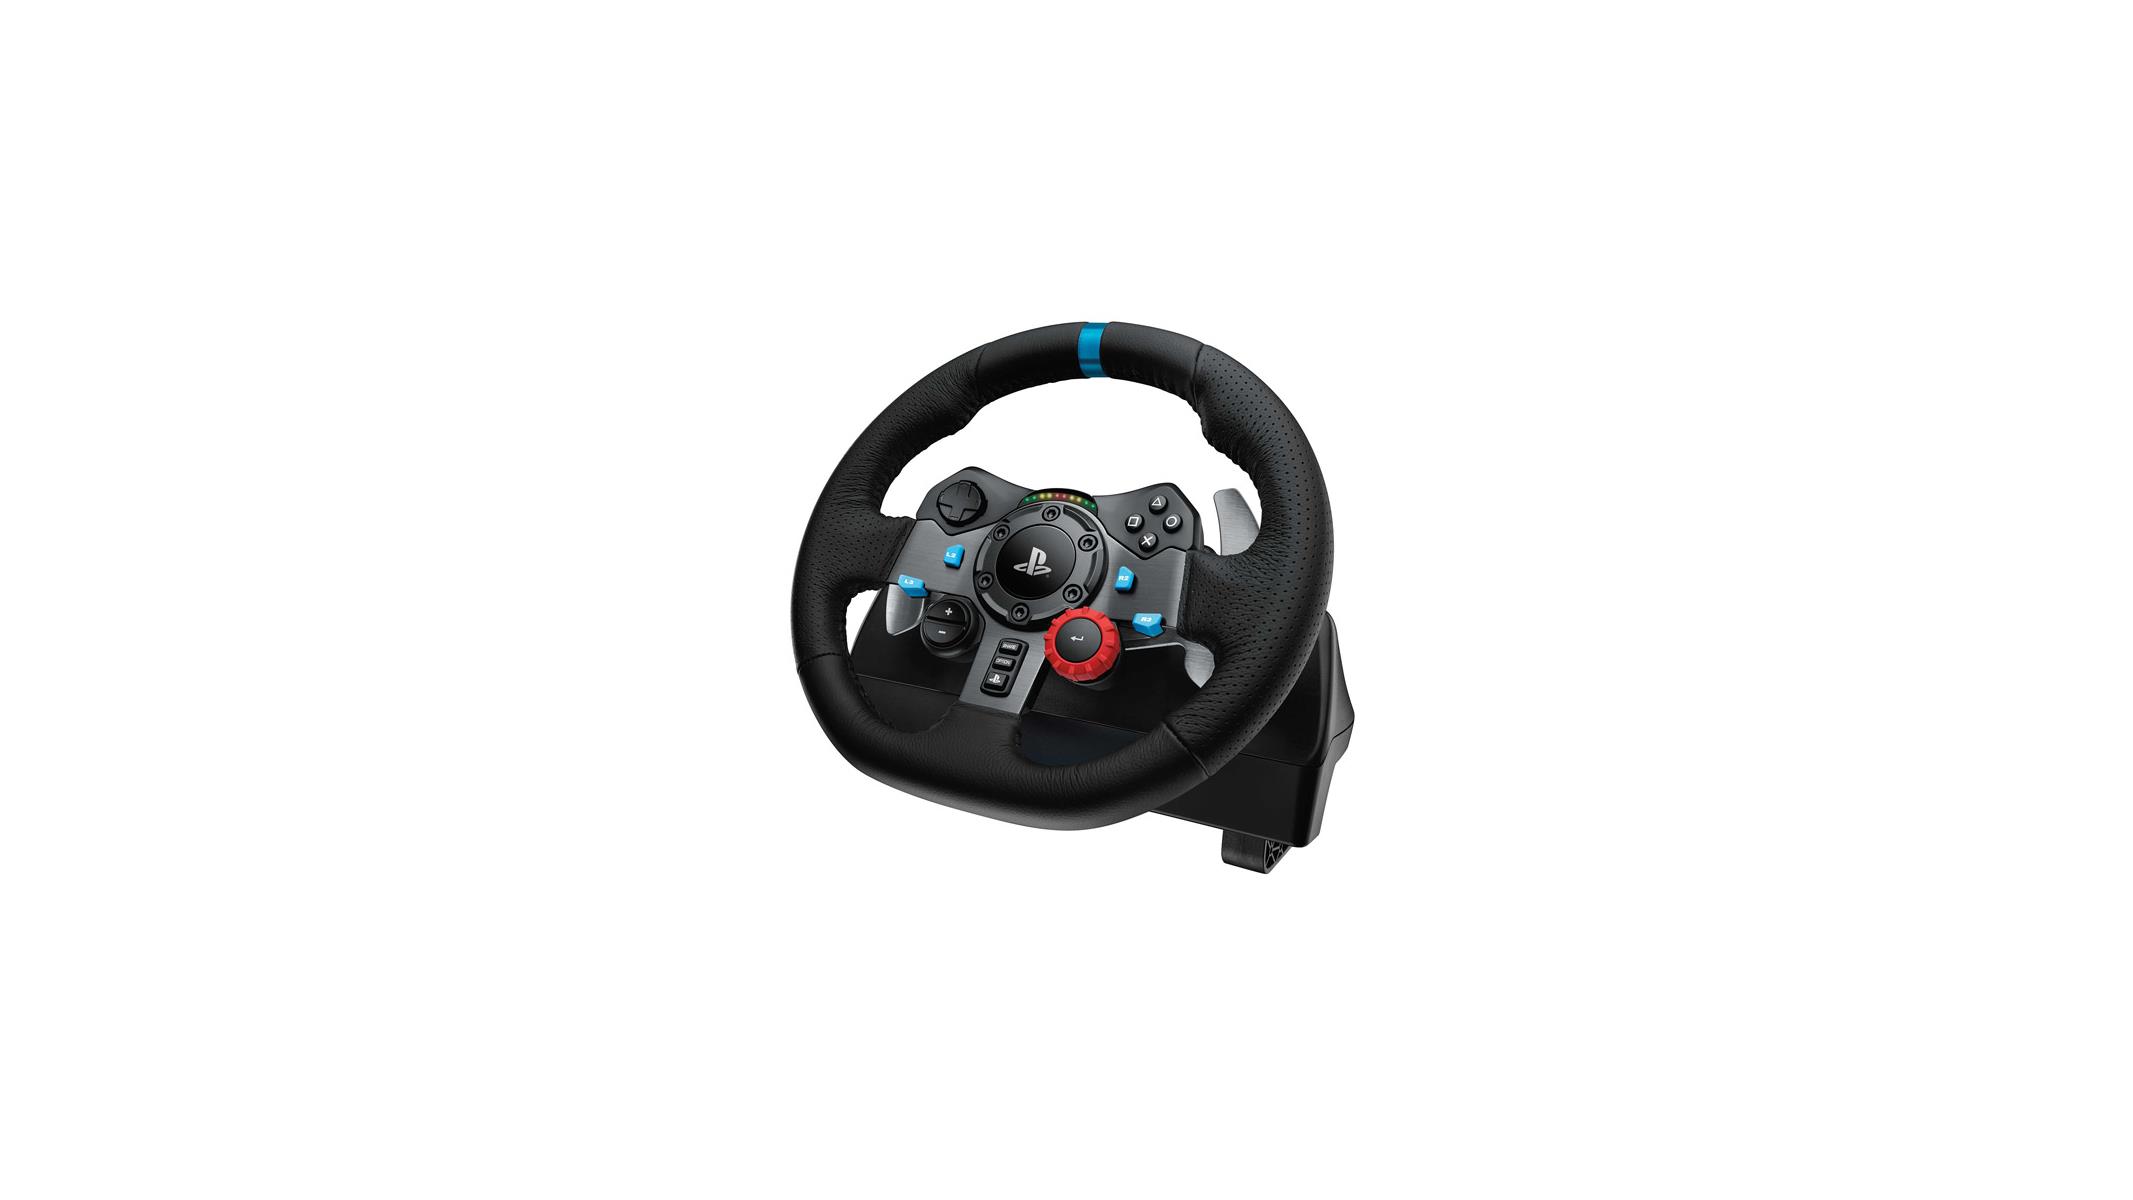 Logitech Introduces G29, G920 Racing Wheels For PS3, PS4, Xbox One And PC